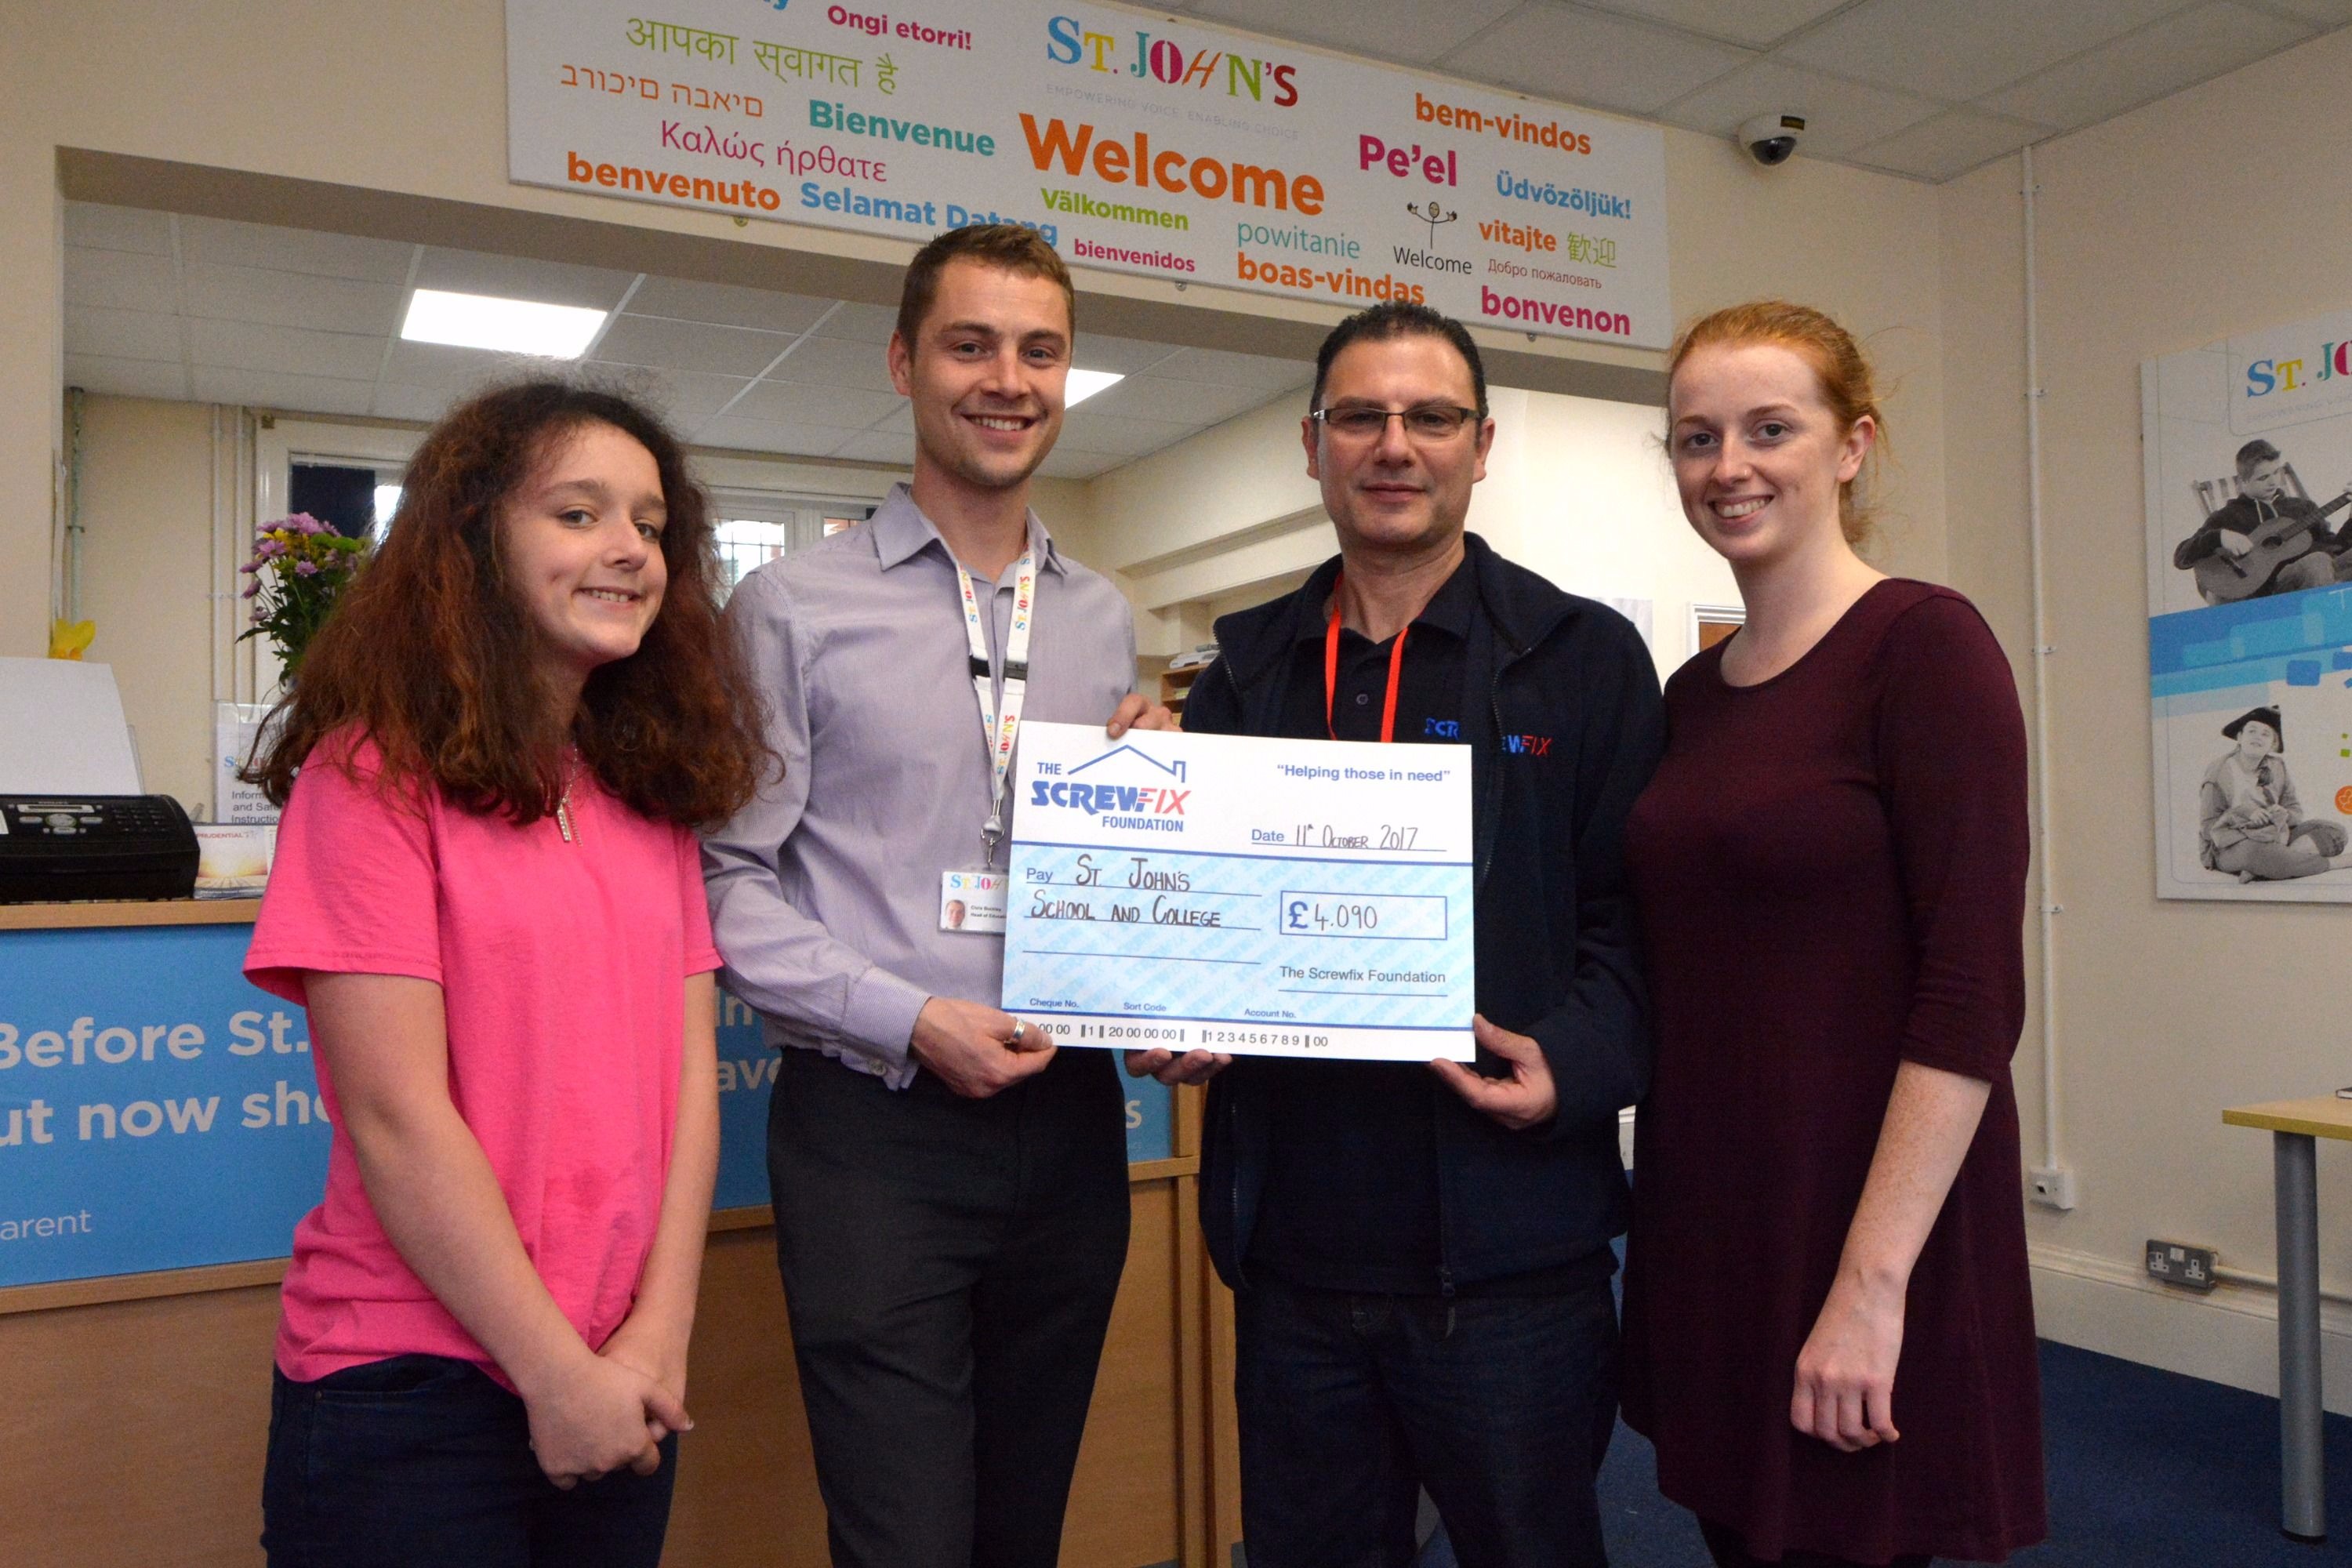 St. John’s School And College Receives Generous Donation From The Screwfix Foundation